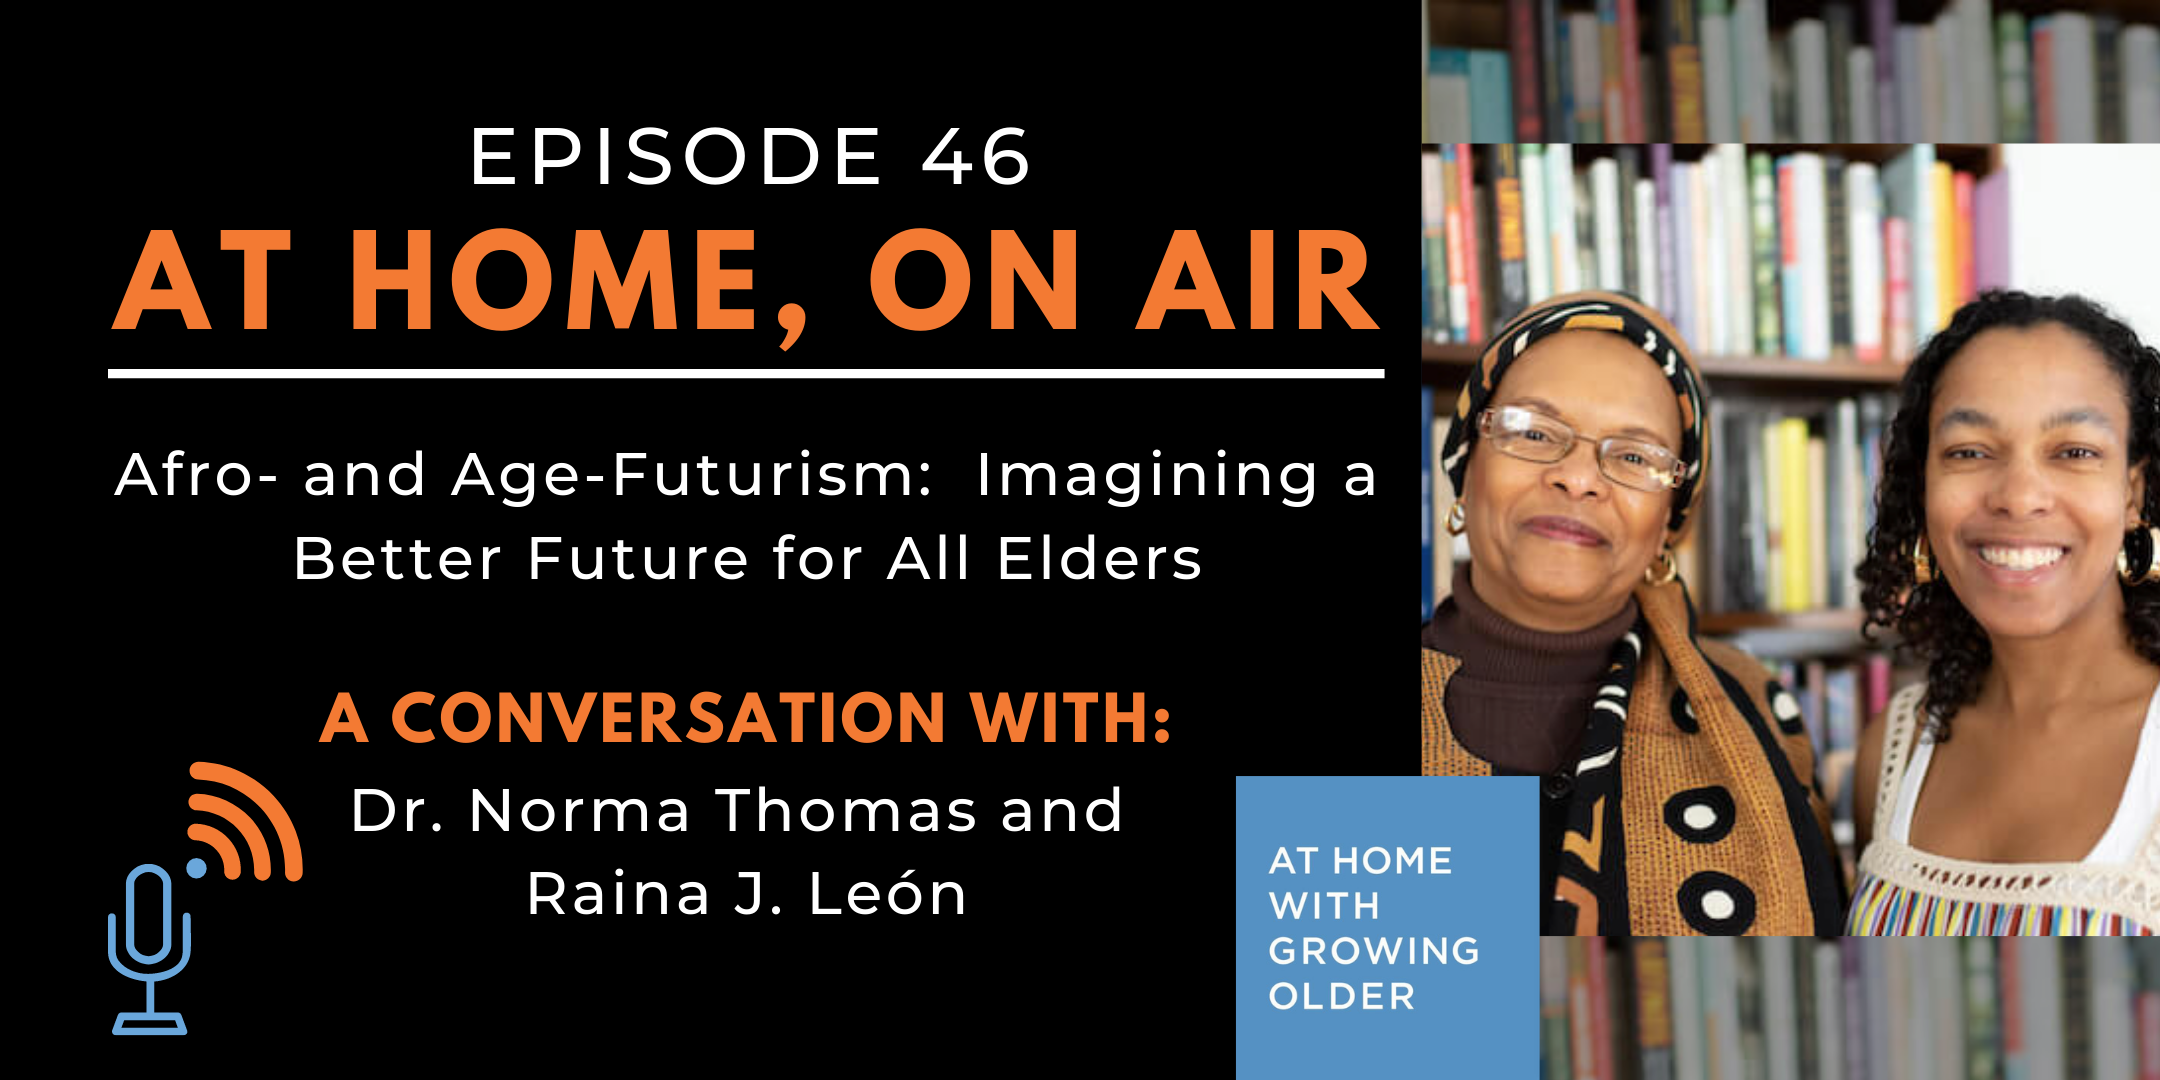 At Home, On Air:  A Conversation with Raina J. León and Dr. Norma Thomas